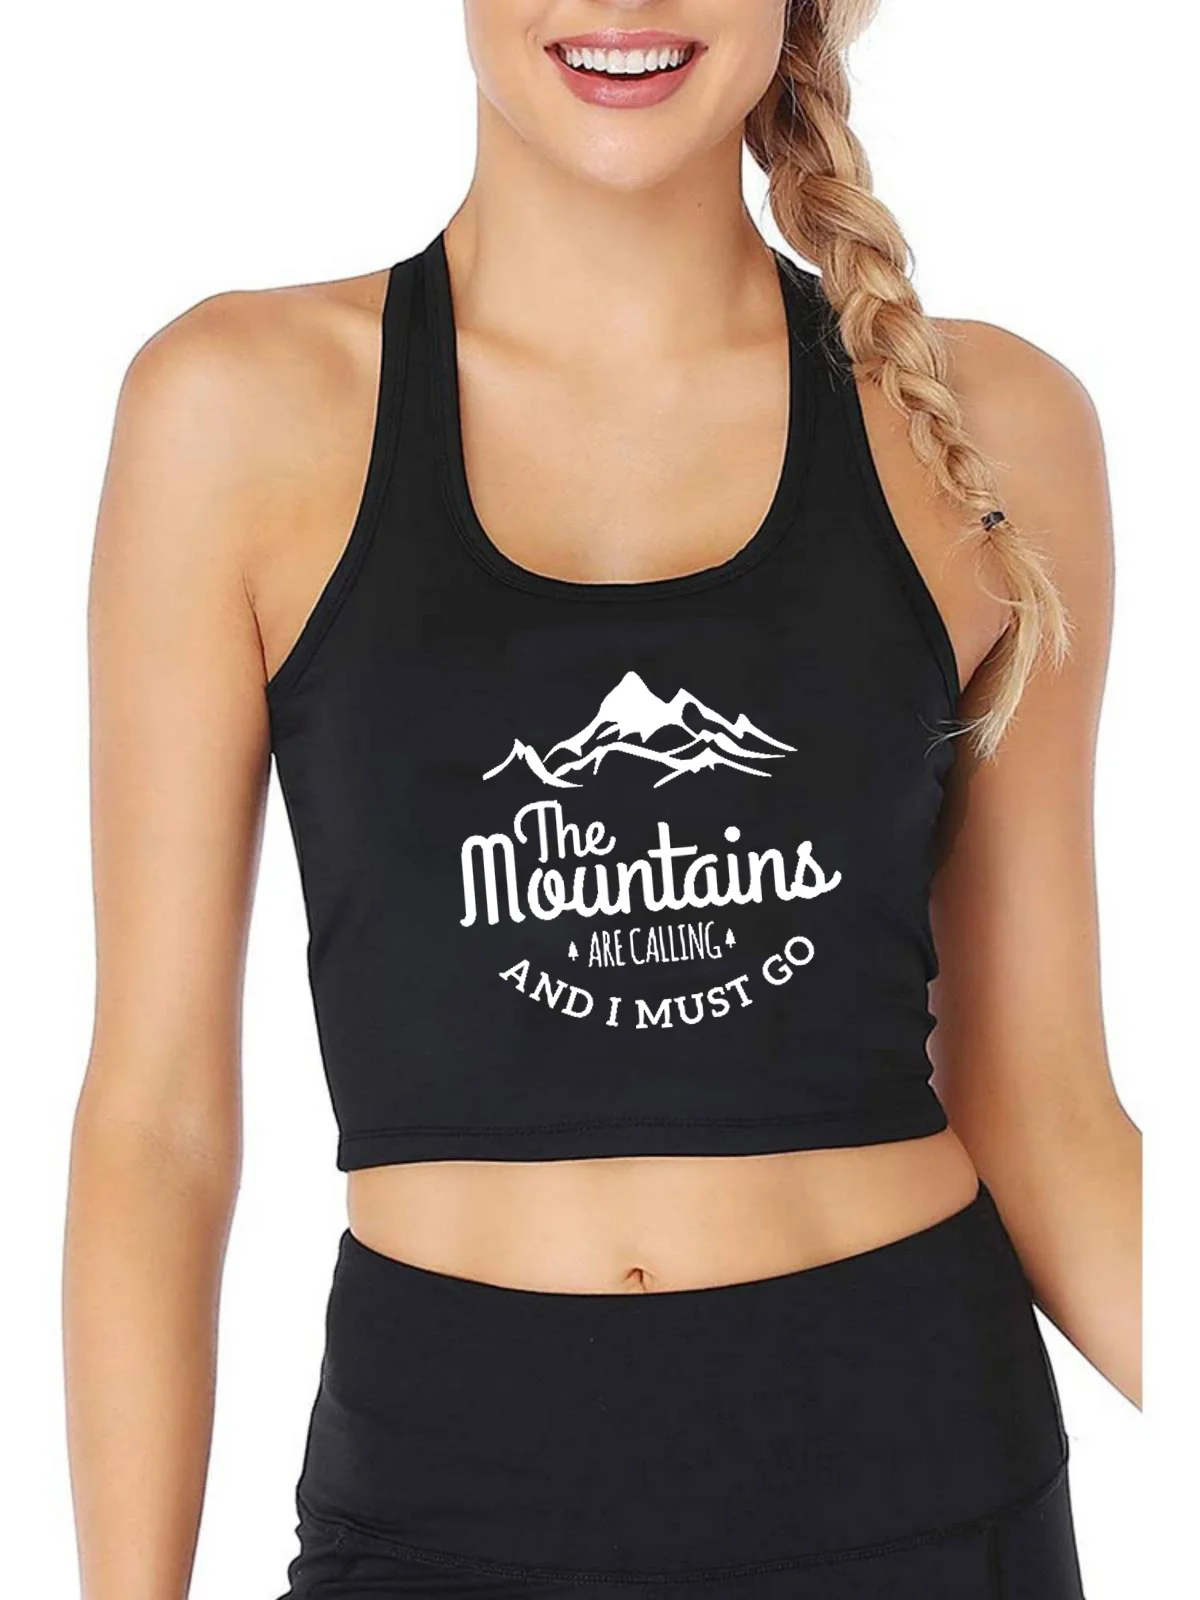 

The Mountains Are Calling And I Must Go Graphic Adventure Tank Tops Women's Breathable Slim Fit Yoga Sports Training Crop Tops